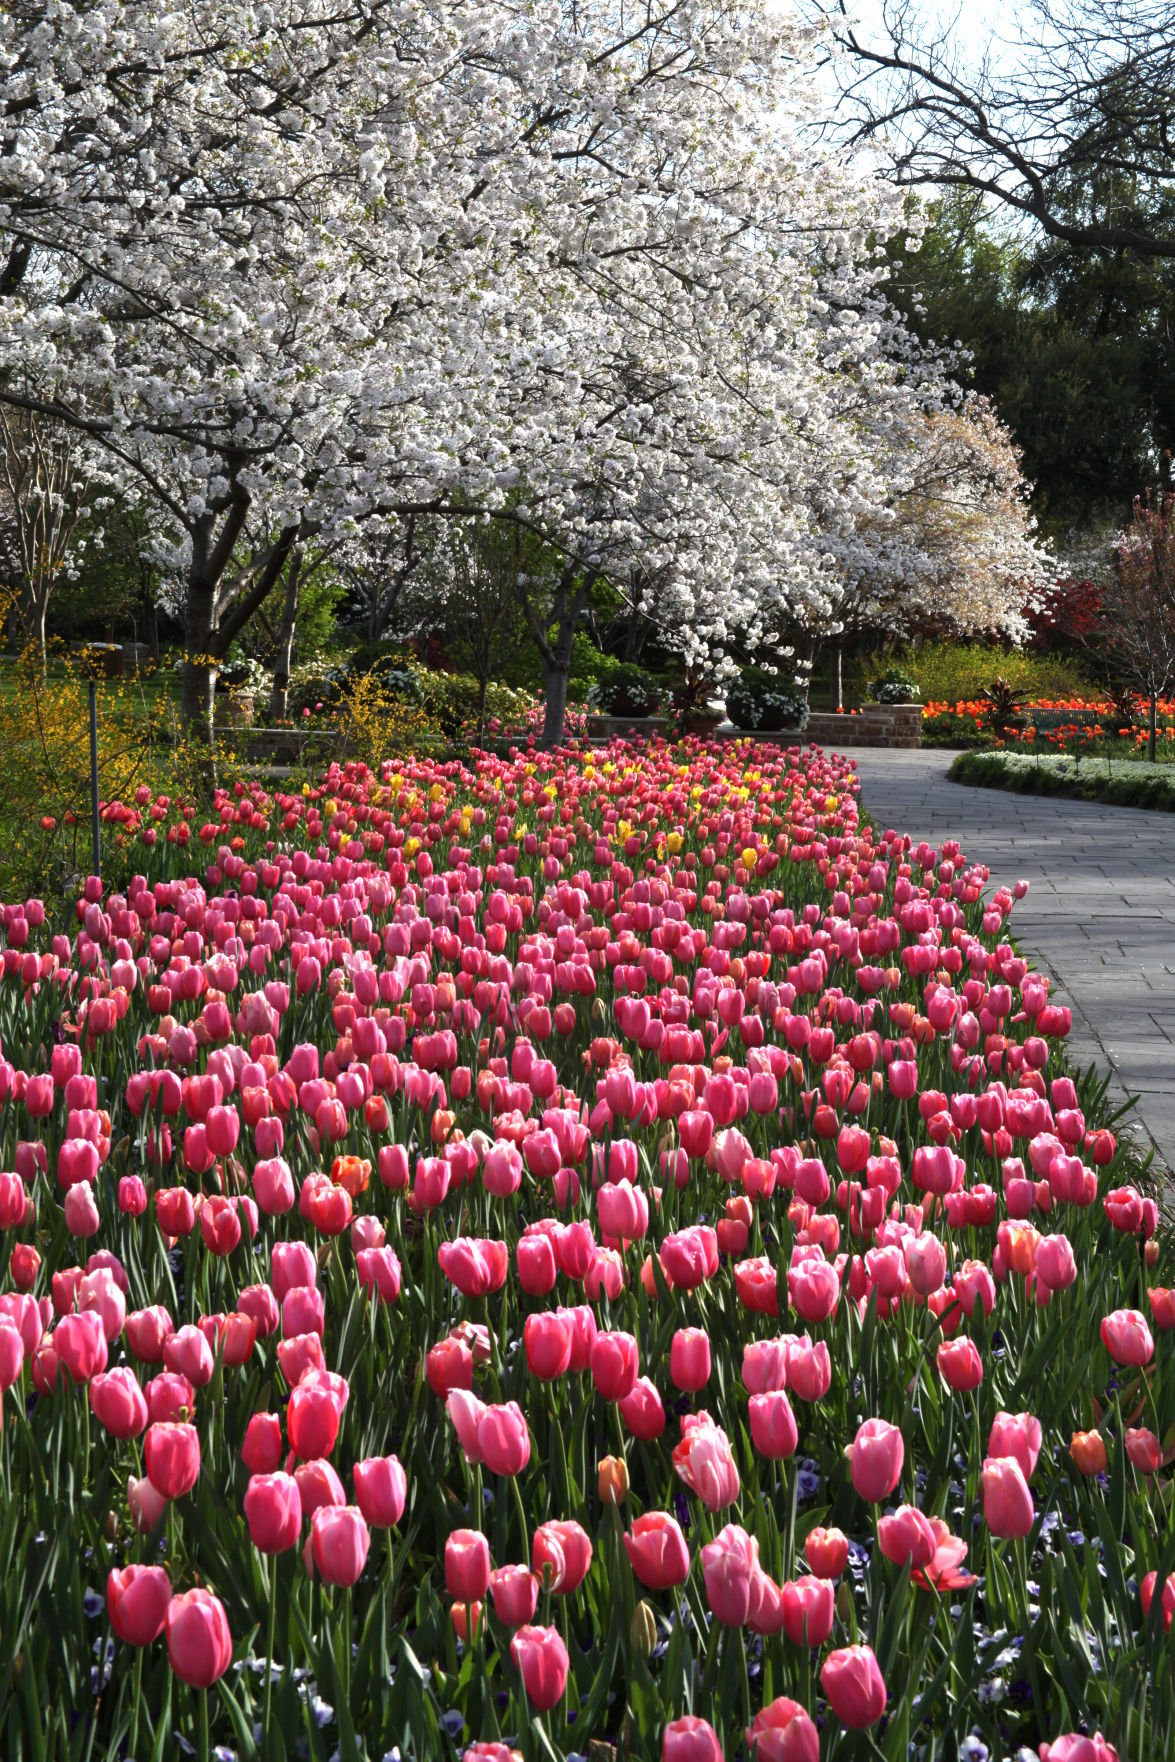 Flower power Dallas area offers picturesque spots for tulip lovers